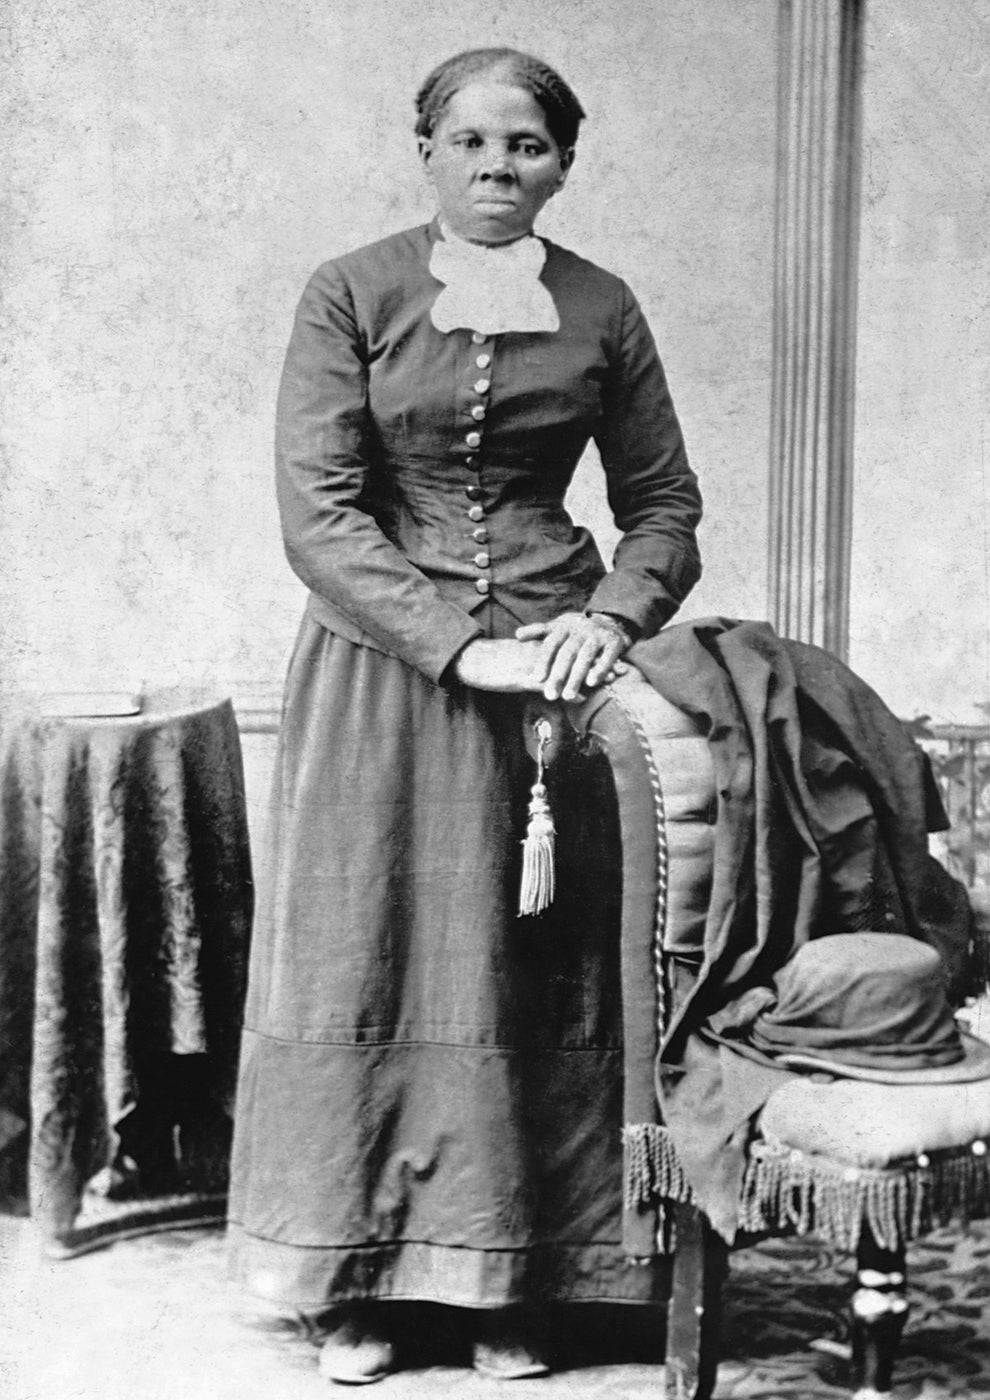 Harriet Tubman, American abolitionist and armed spy for the Union Army during the American Civil War.